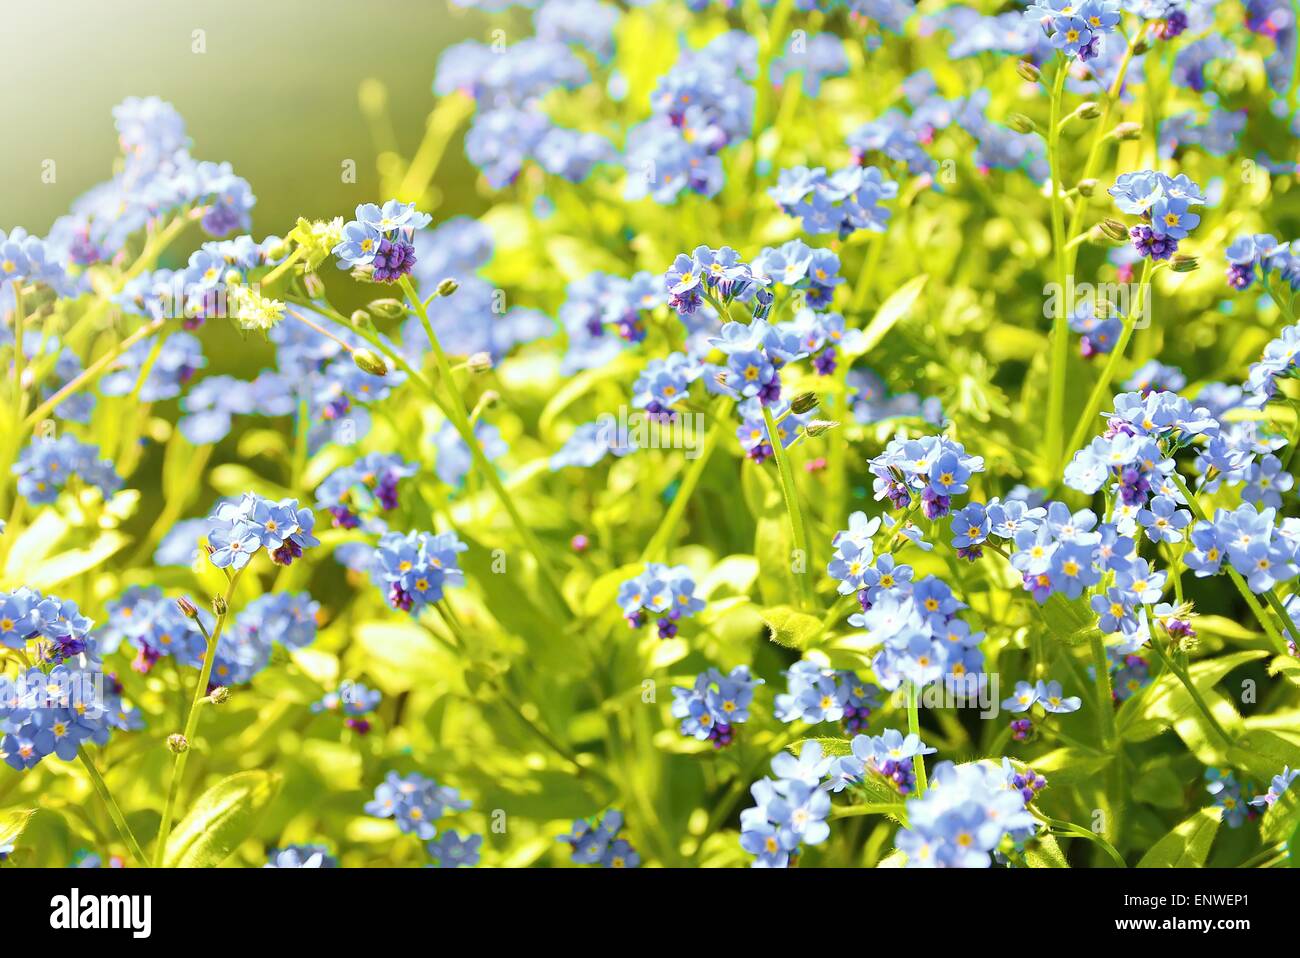 Closeup of the Forget me not plant (Myosotis sylvatica). This plant has small blue blossom and green leaves. Stock Photo